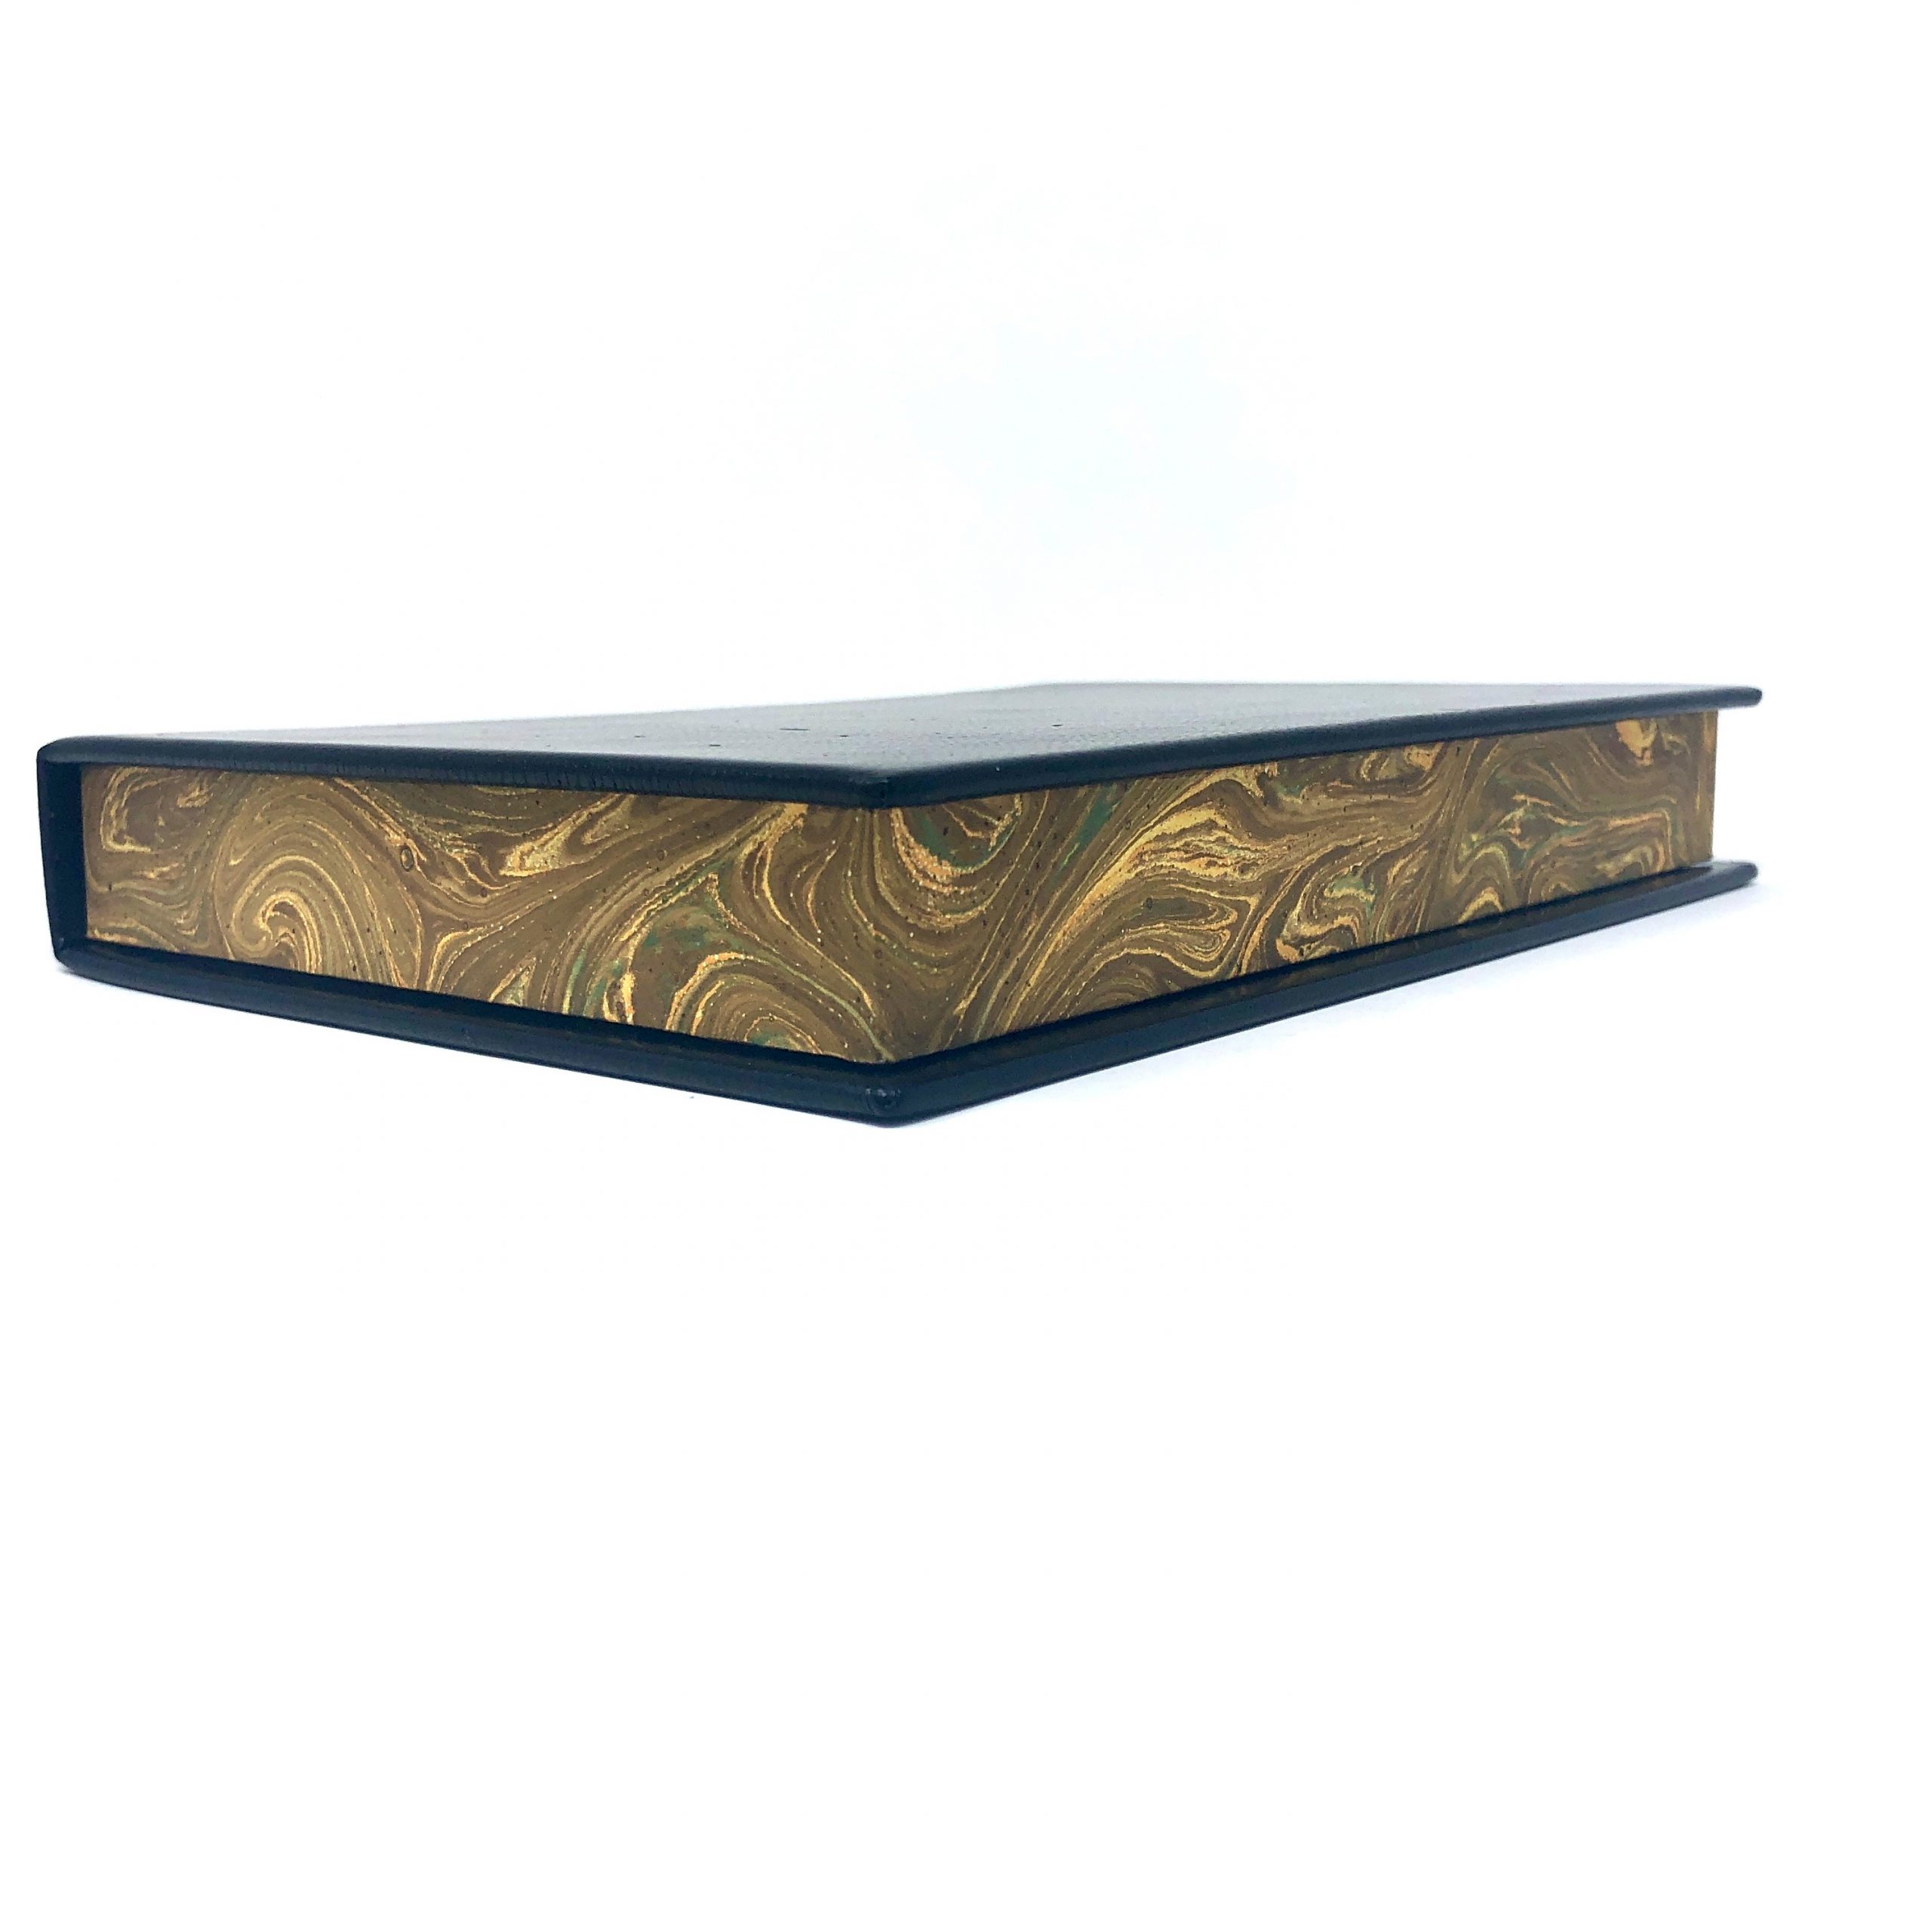 Clamshell fore edge profile